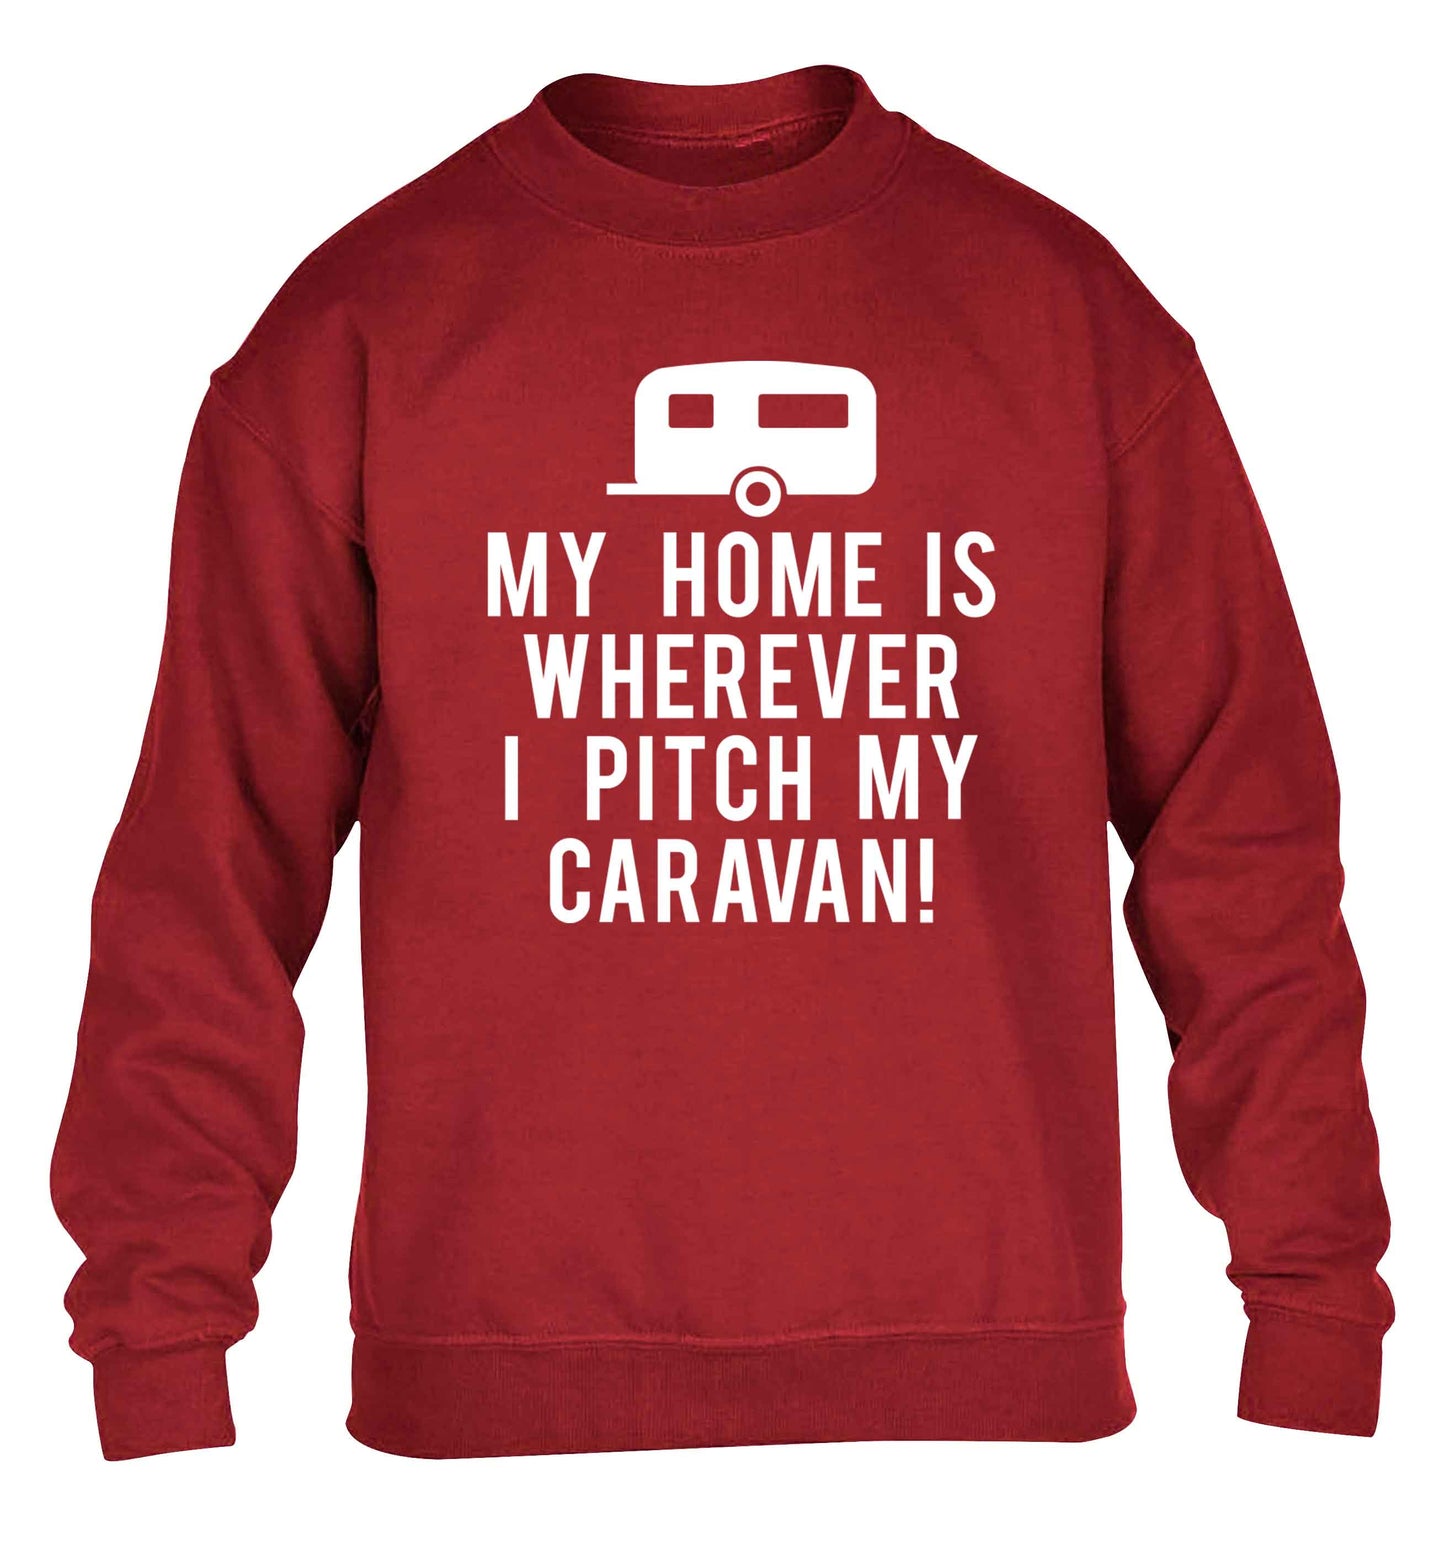 My home is wherever I pitch my caravan children's grey sweater 12-13 Years